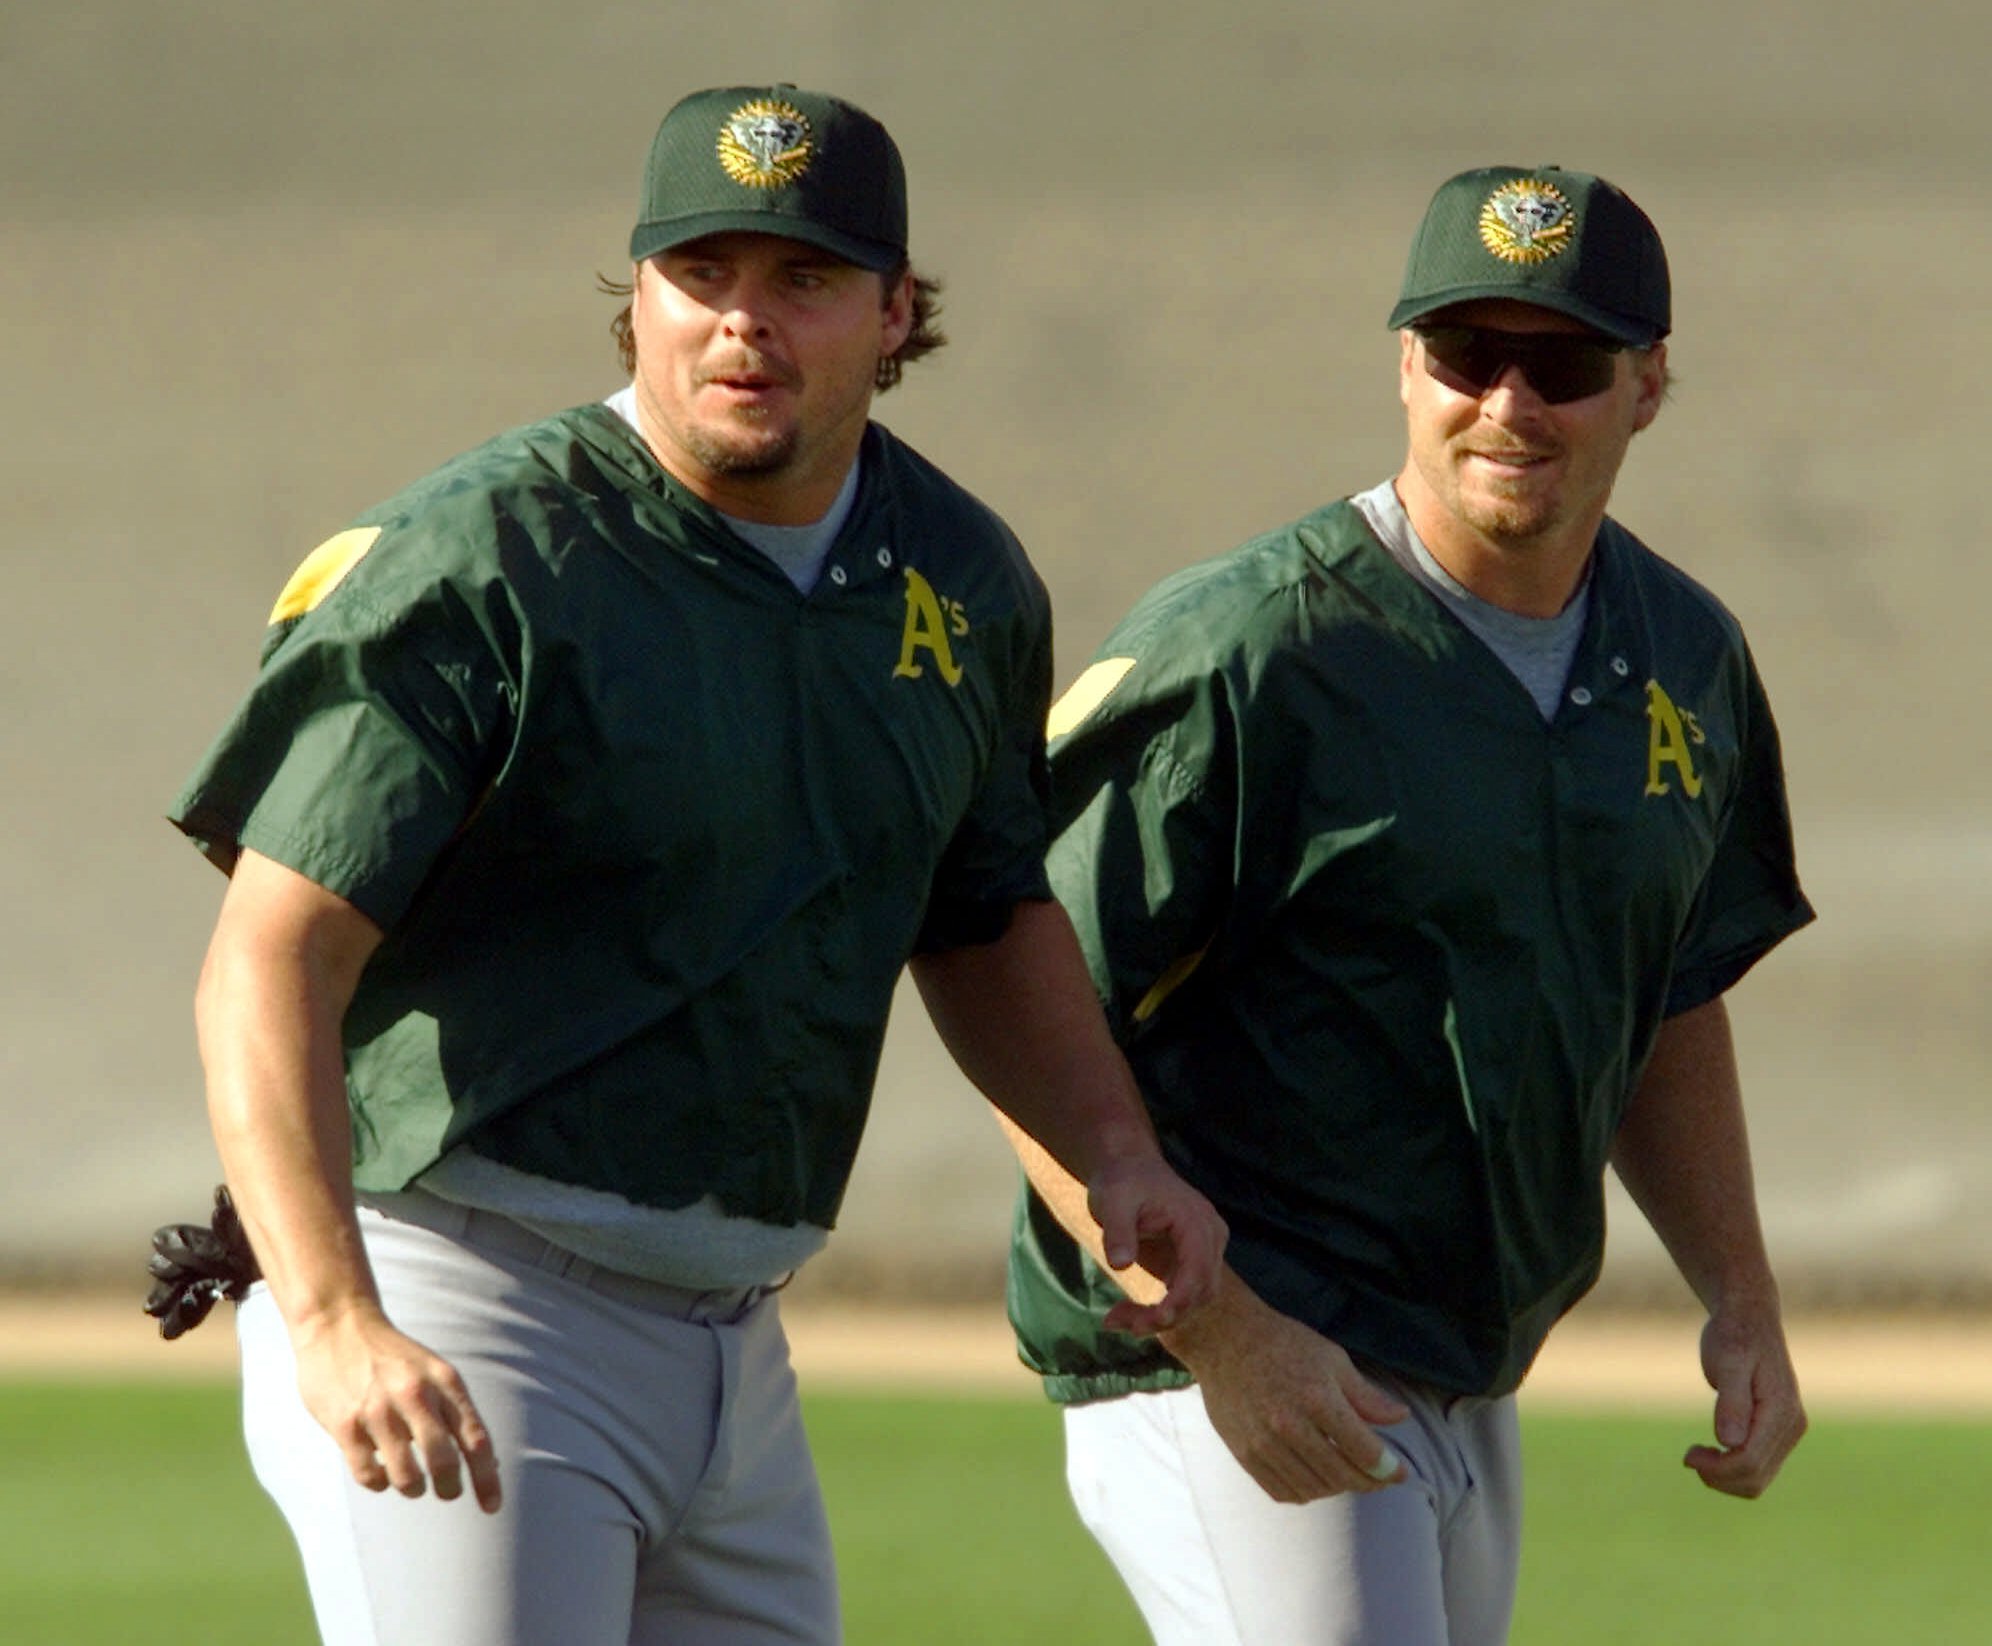 Former Athletics outfielder Jeremy Giambi shot himself in apparent